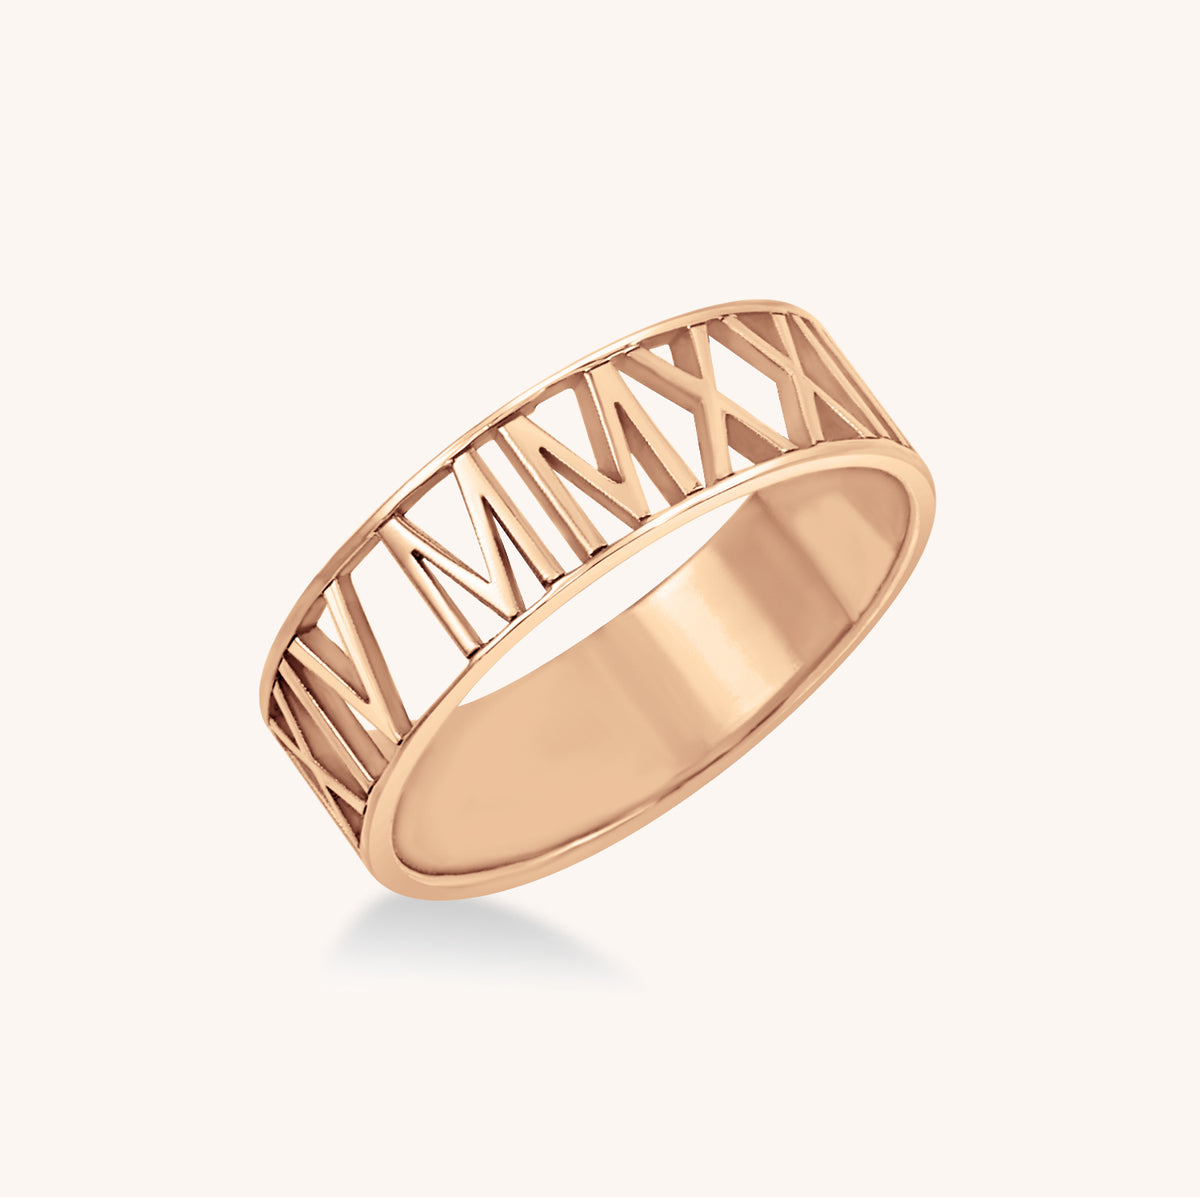 1922 Roman Numeral Date Ring